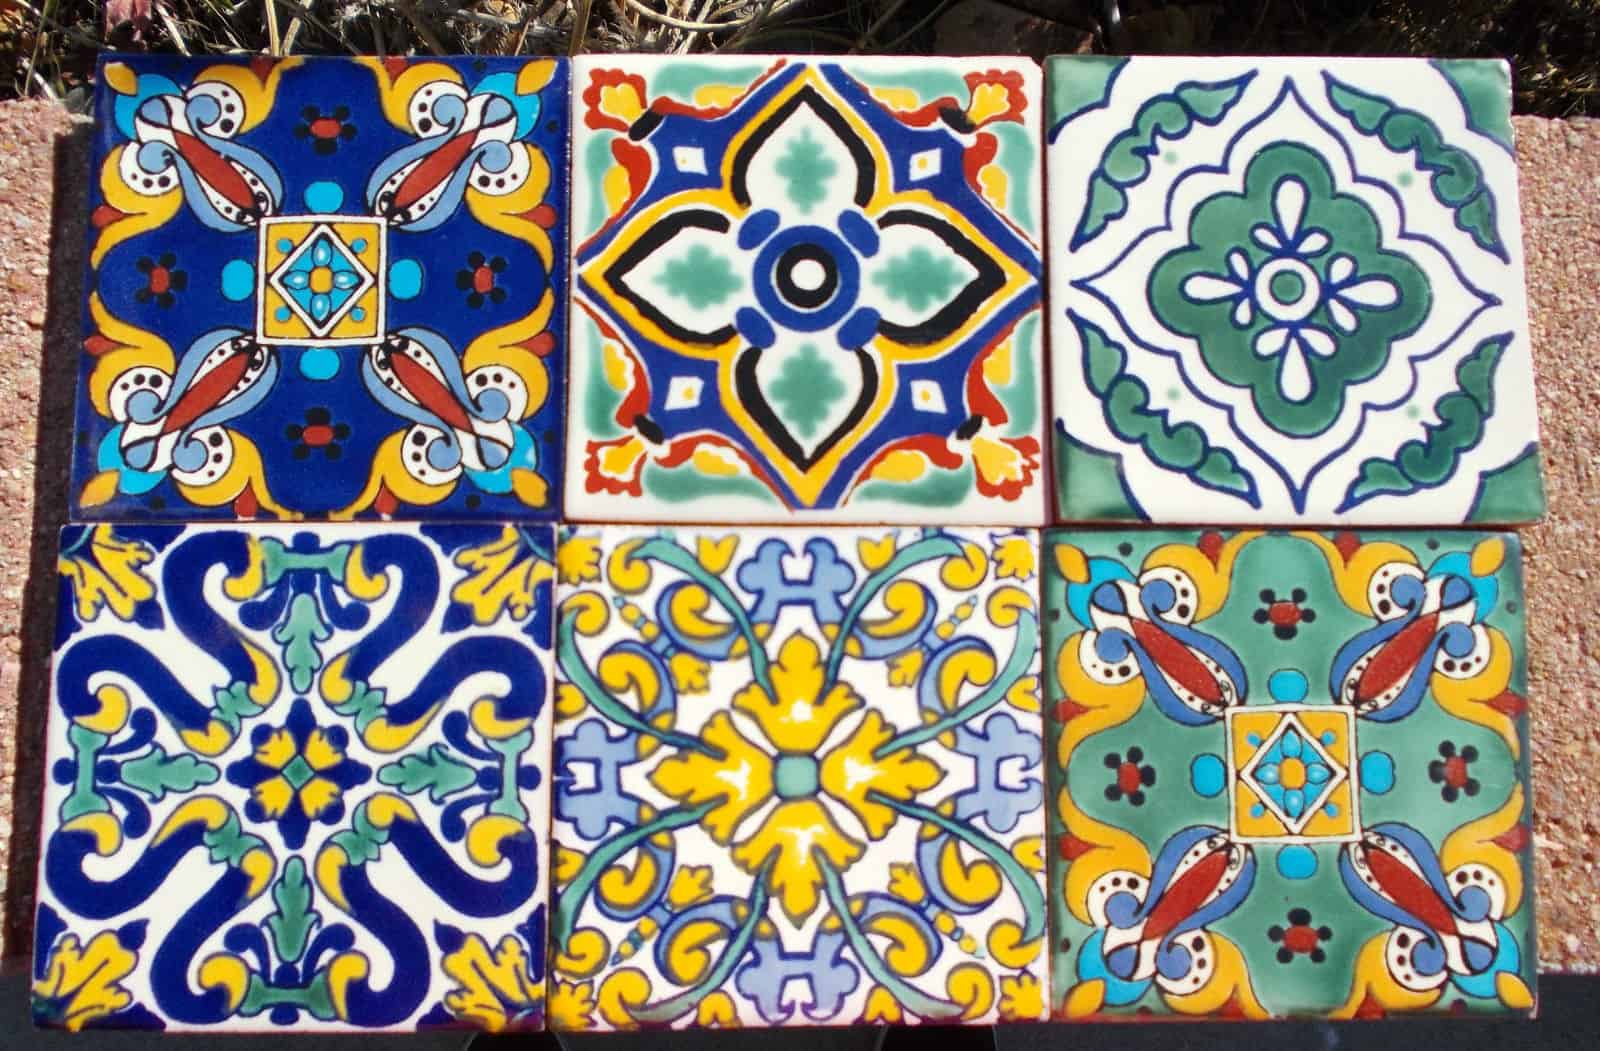  Buy Decorative Tiles Selling all types of Decorative Tiles at a reasonable price 